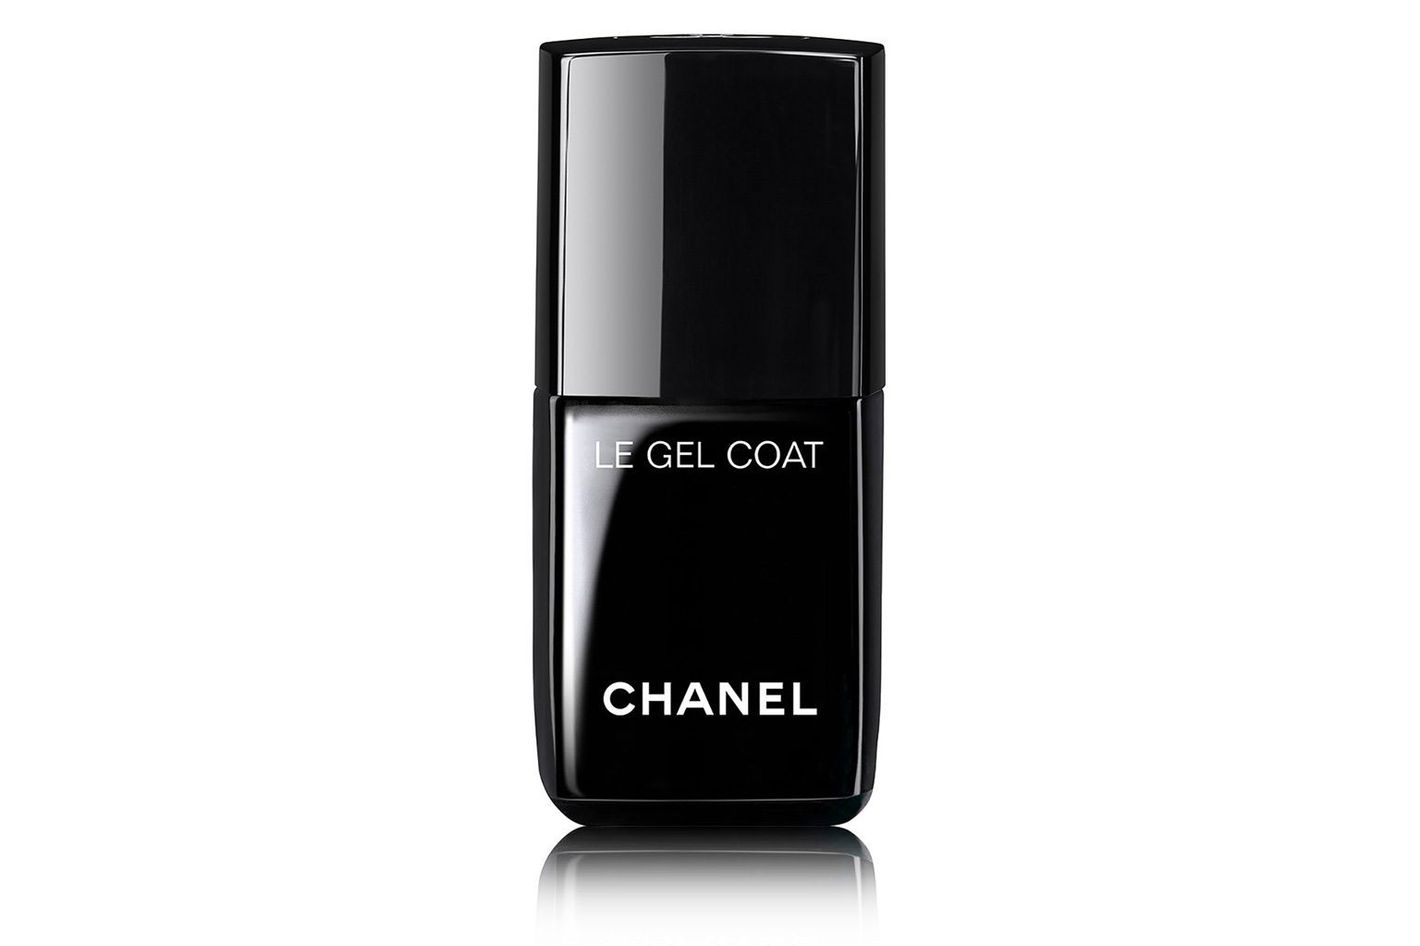 Chanel's Polish Is Great